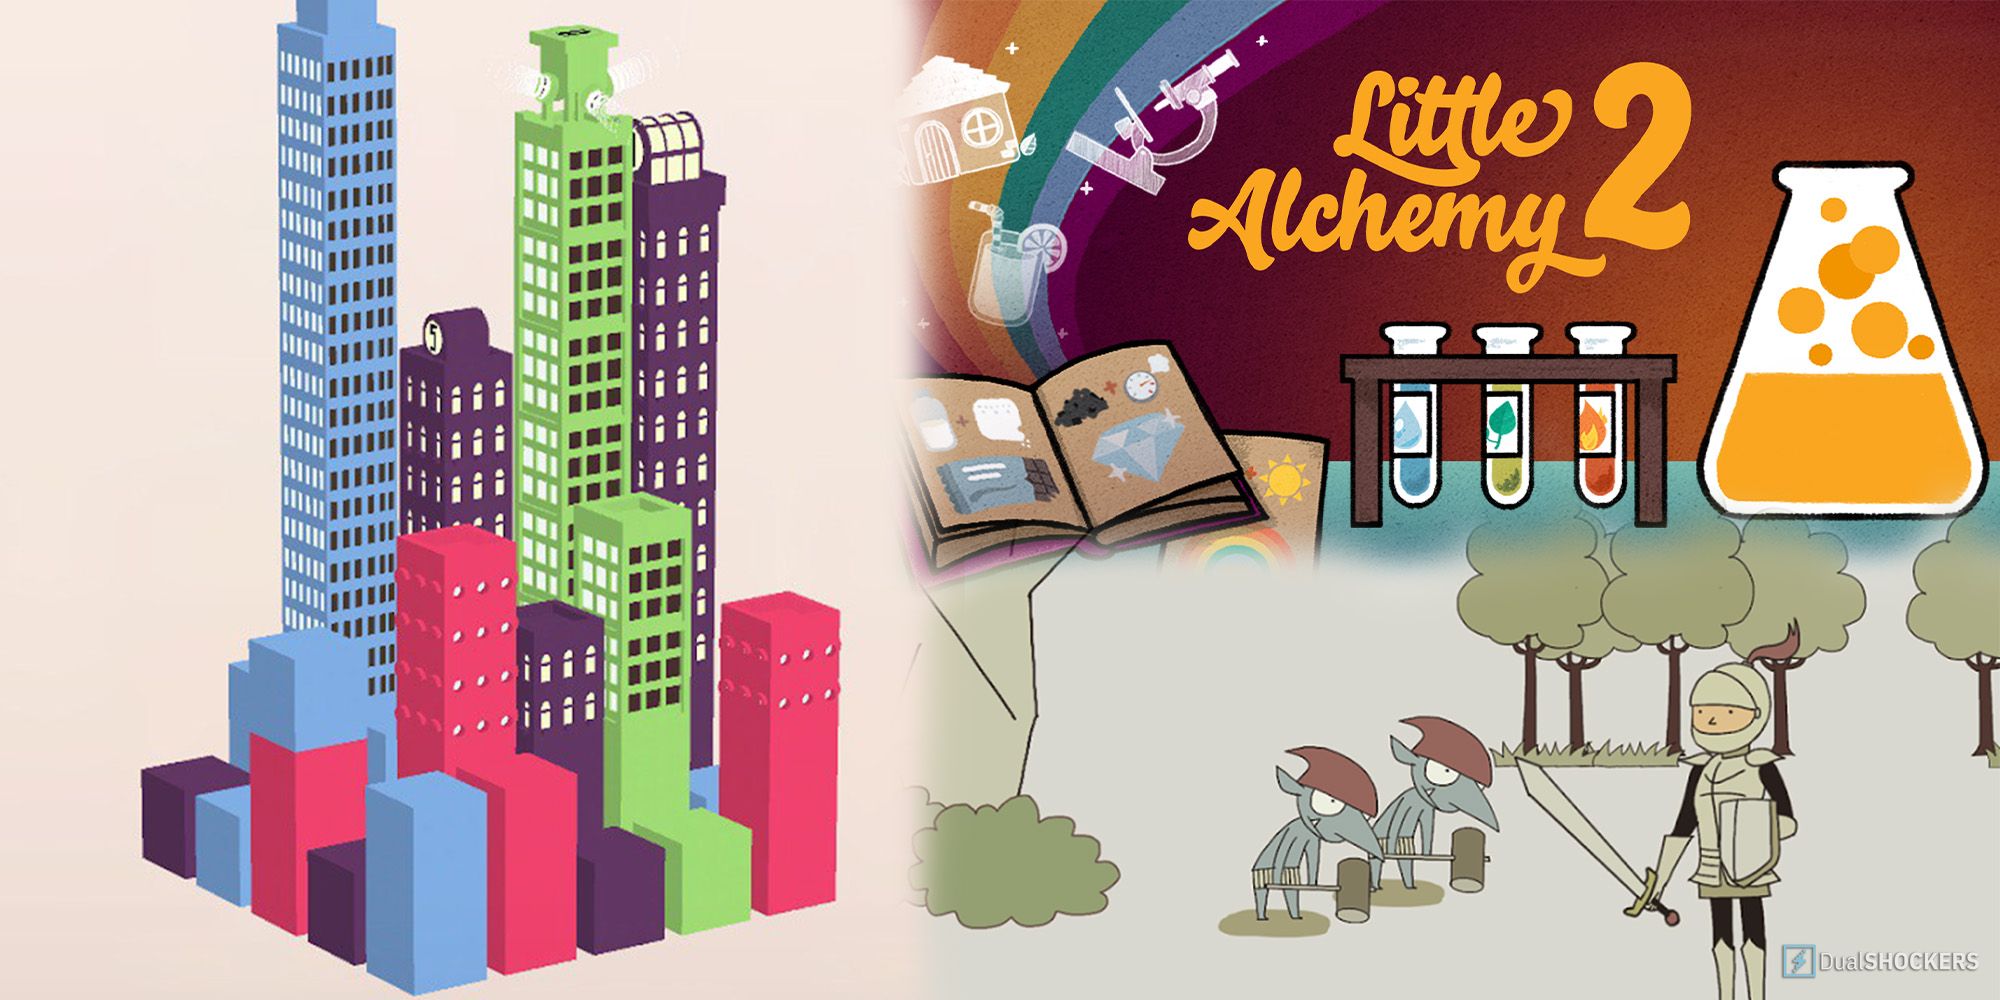 Featured Image for Best Puzzle Game on Mobile, High Rise, Little Alchemy 2, and IQ Dungeon from Left to RIght